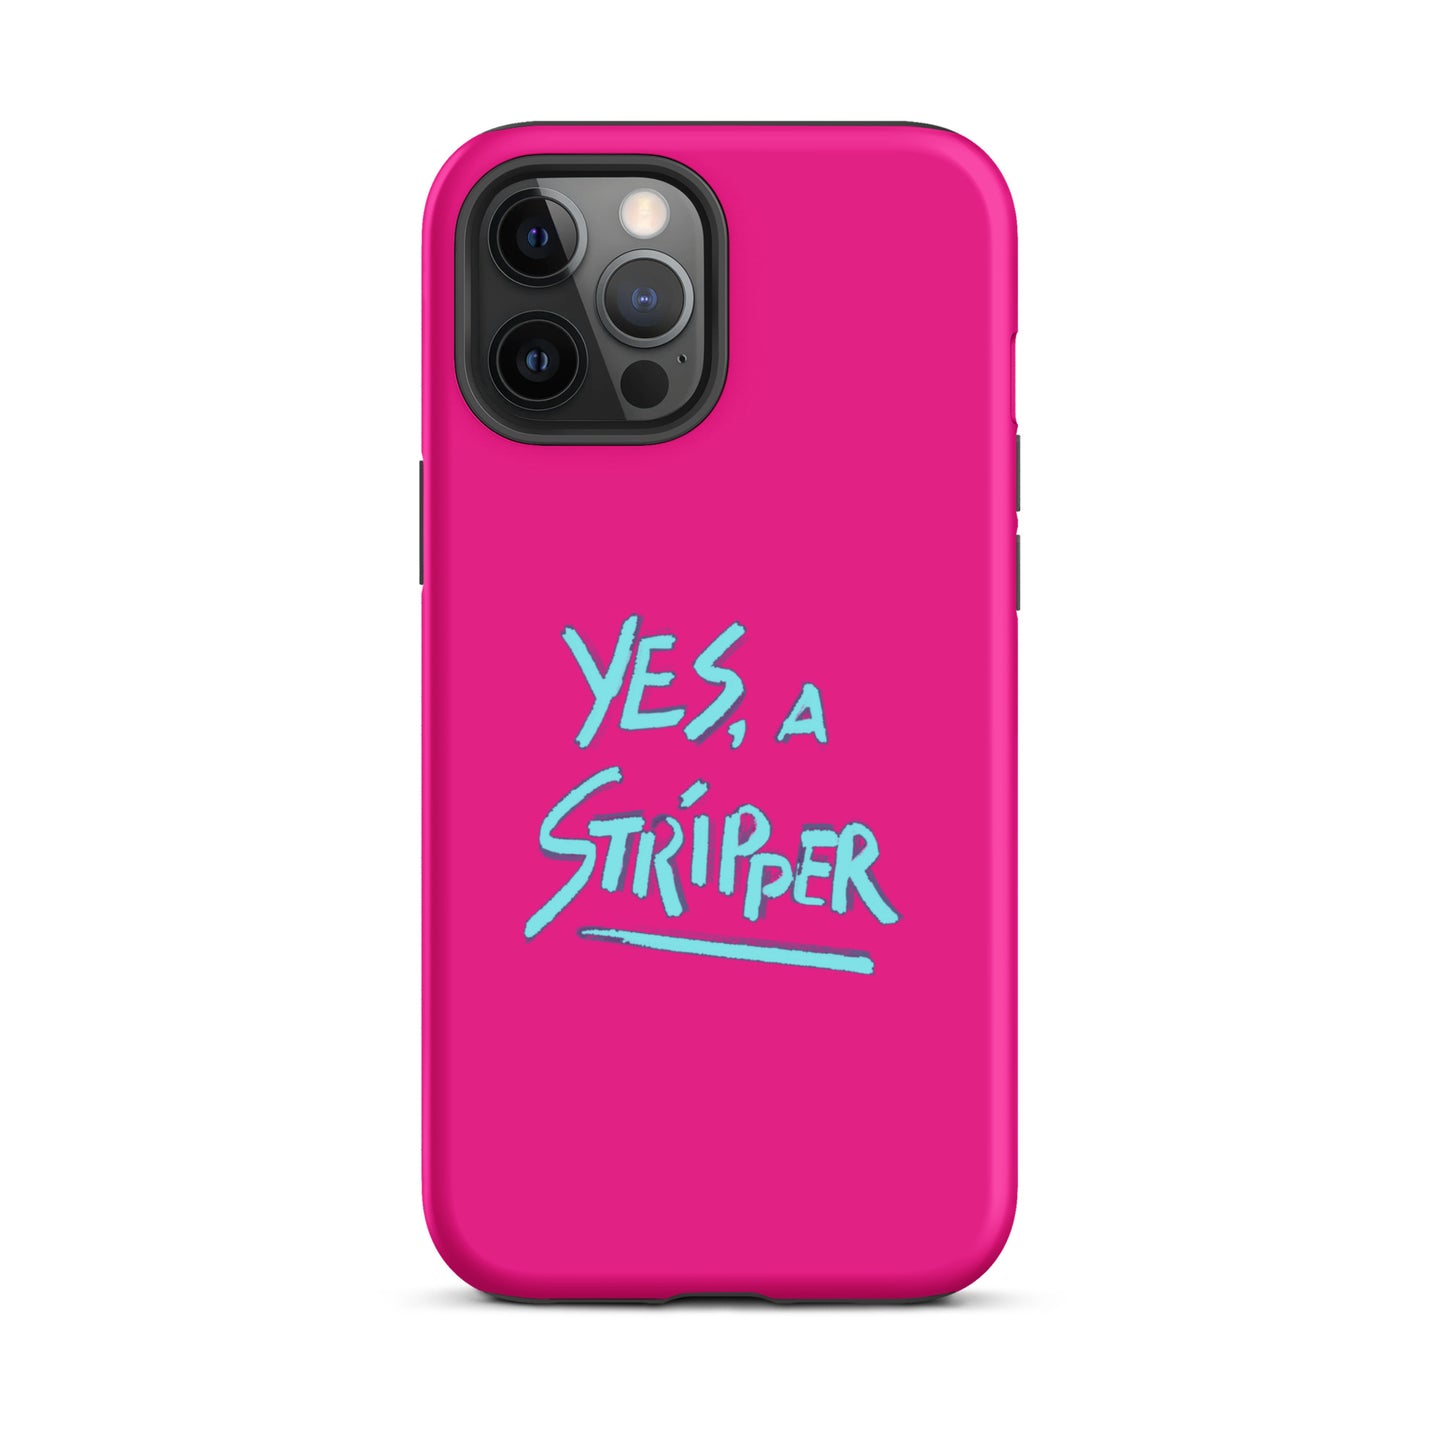 Hot Pink with YaS Logo Phone Case for iPhone